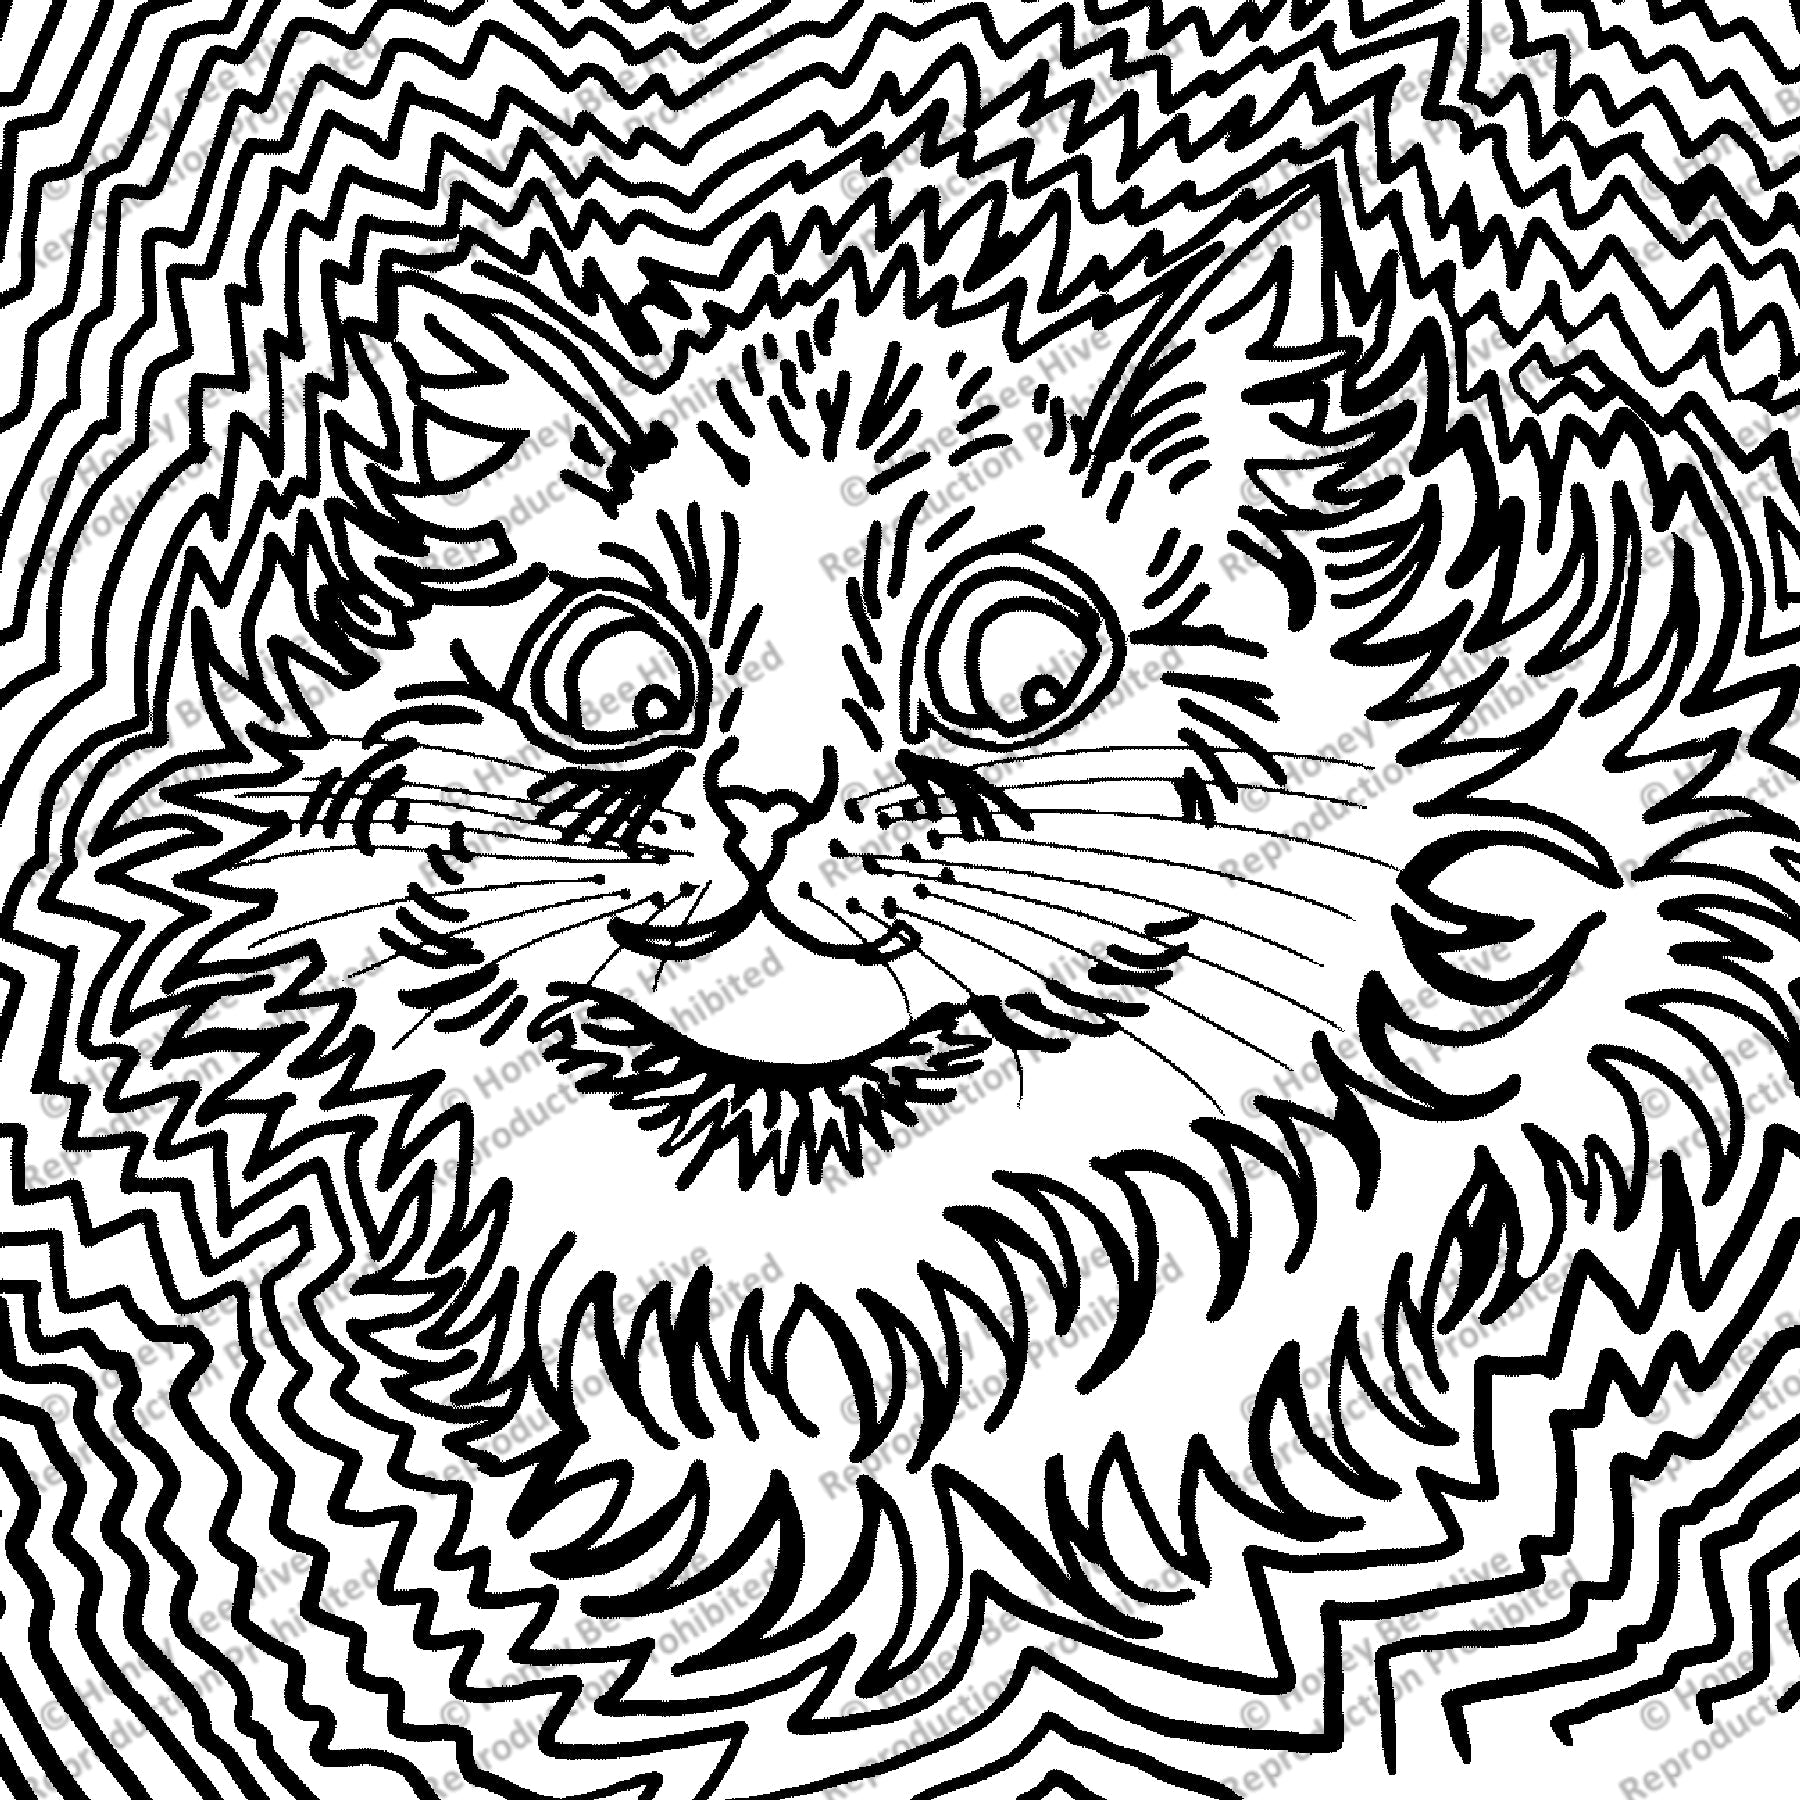 Electric Cat by Louis Wain, rug hooking pattern